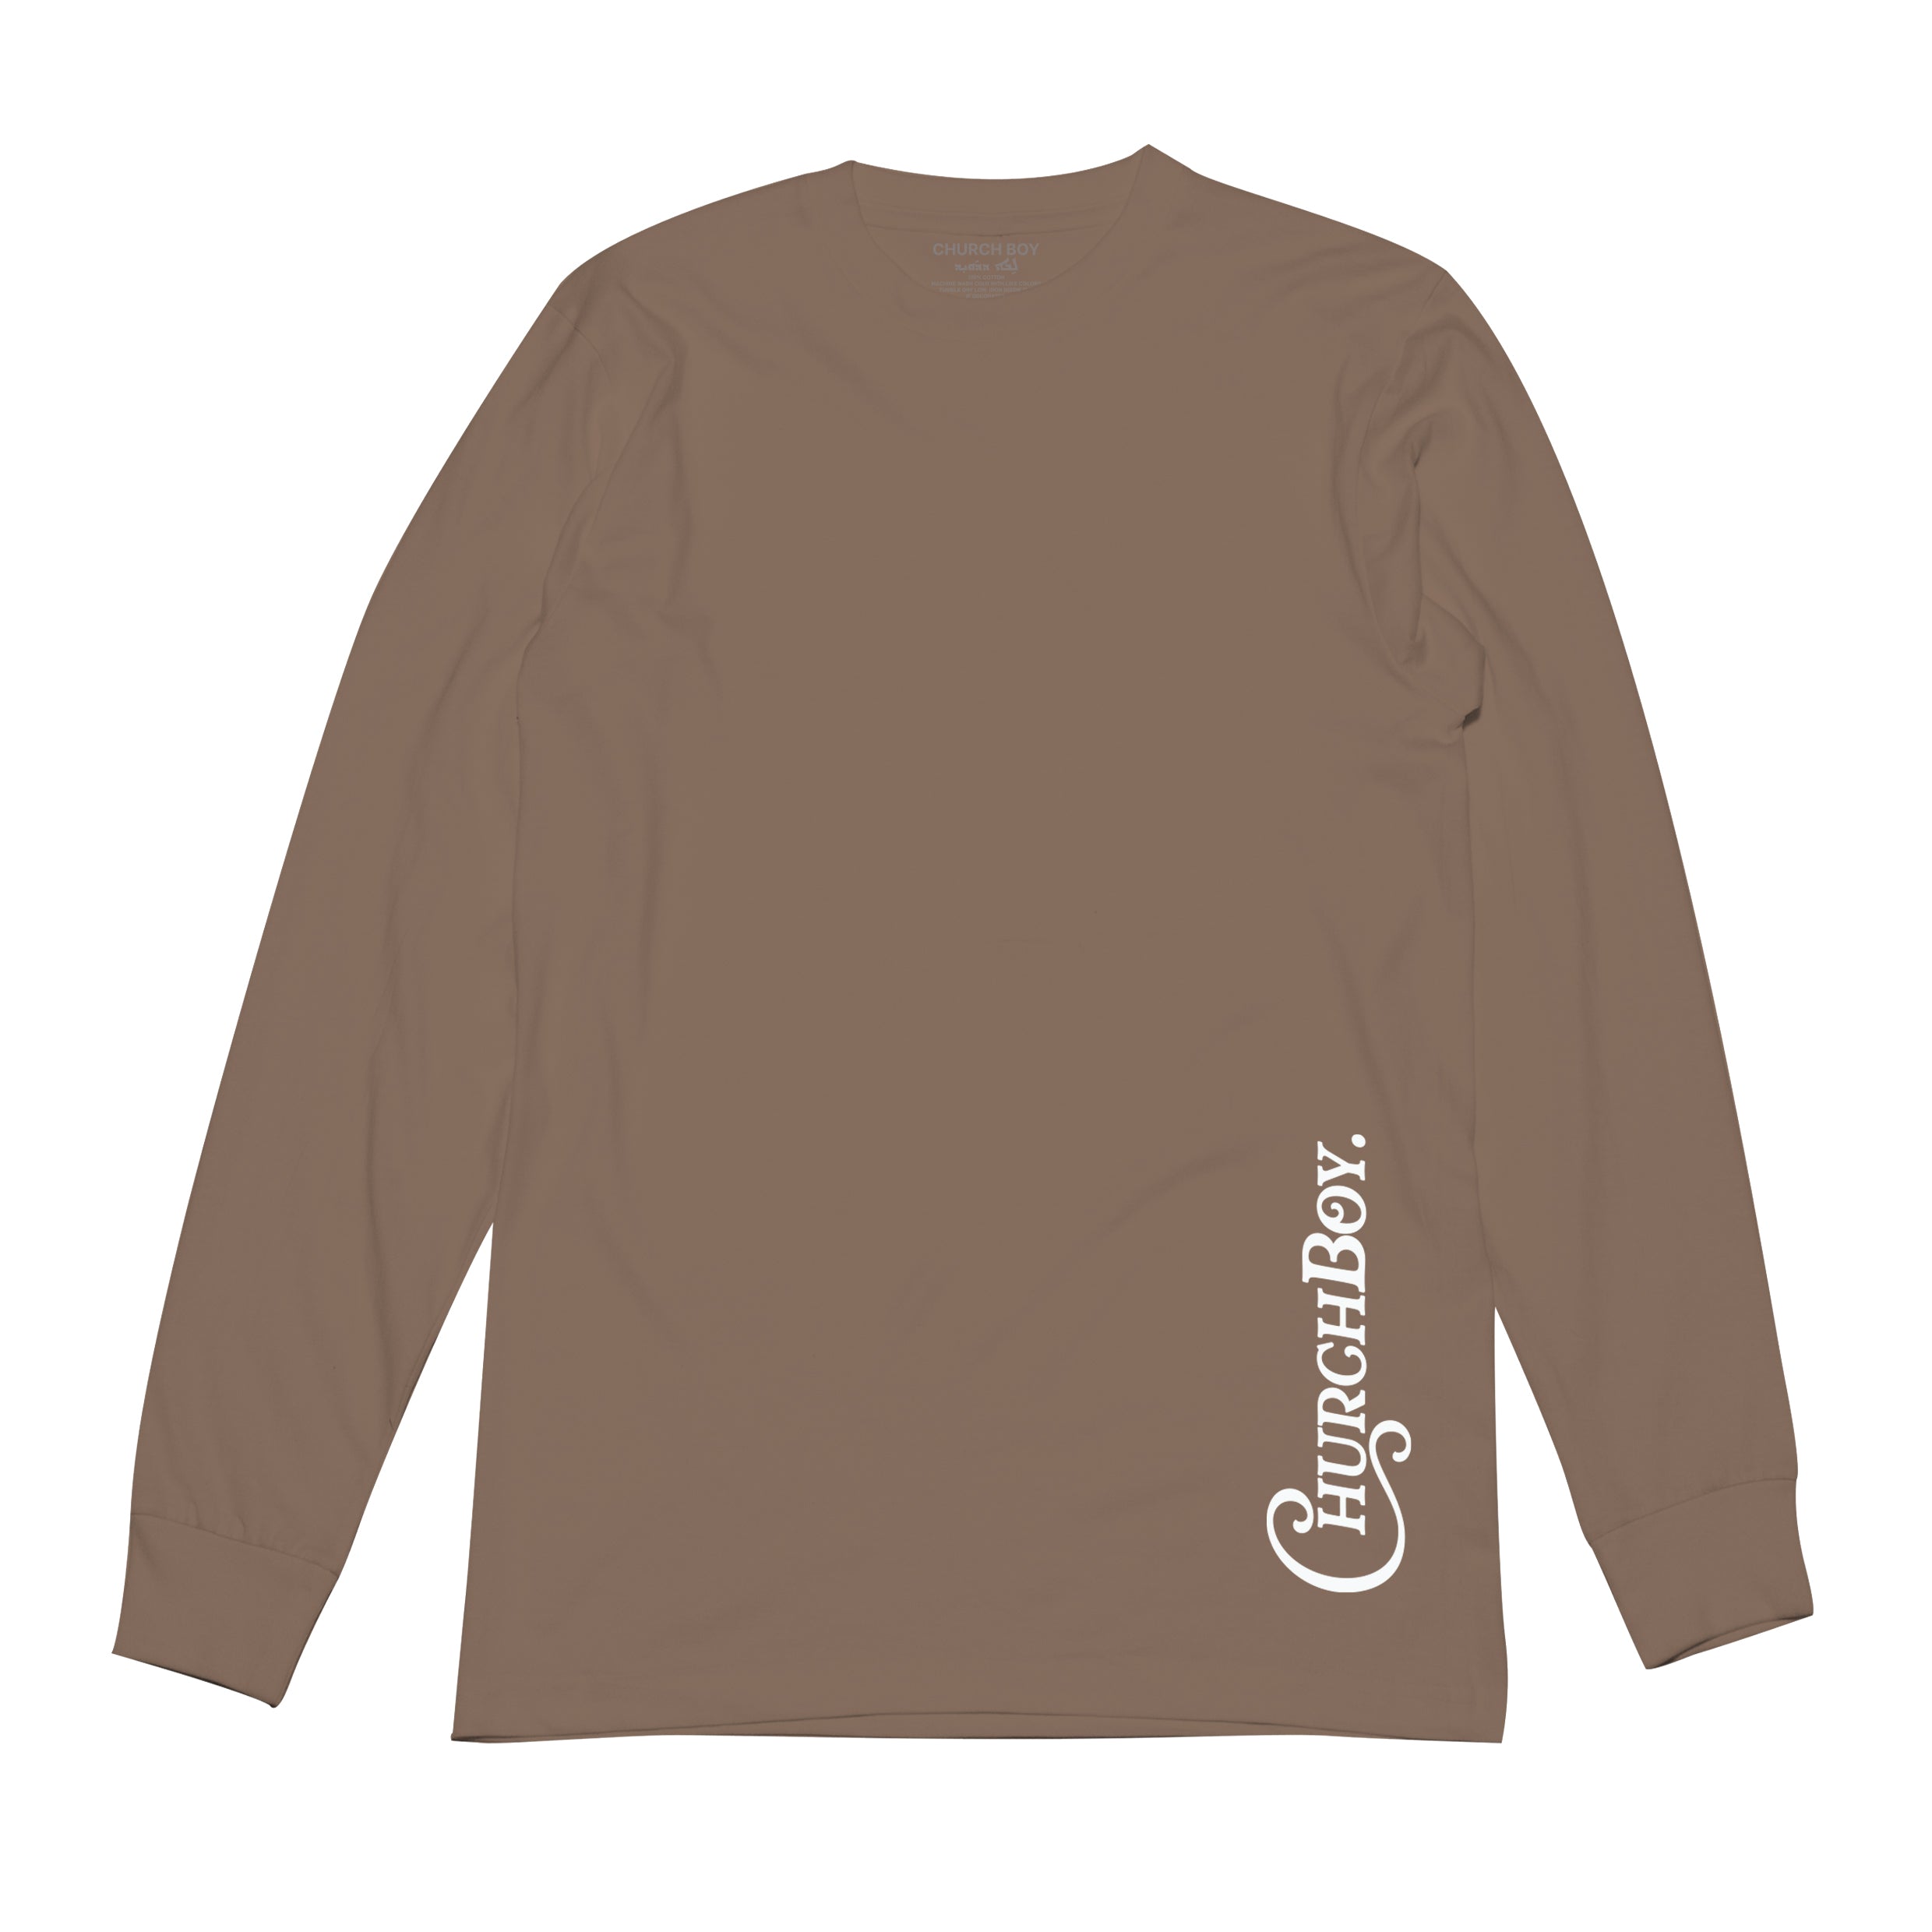 Longsleeve - Brown Pray For Your Friends